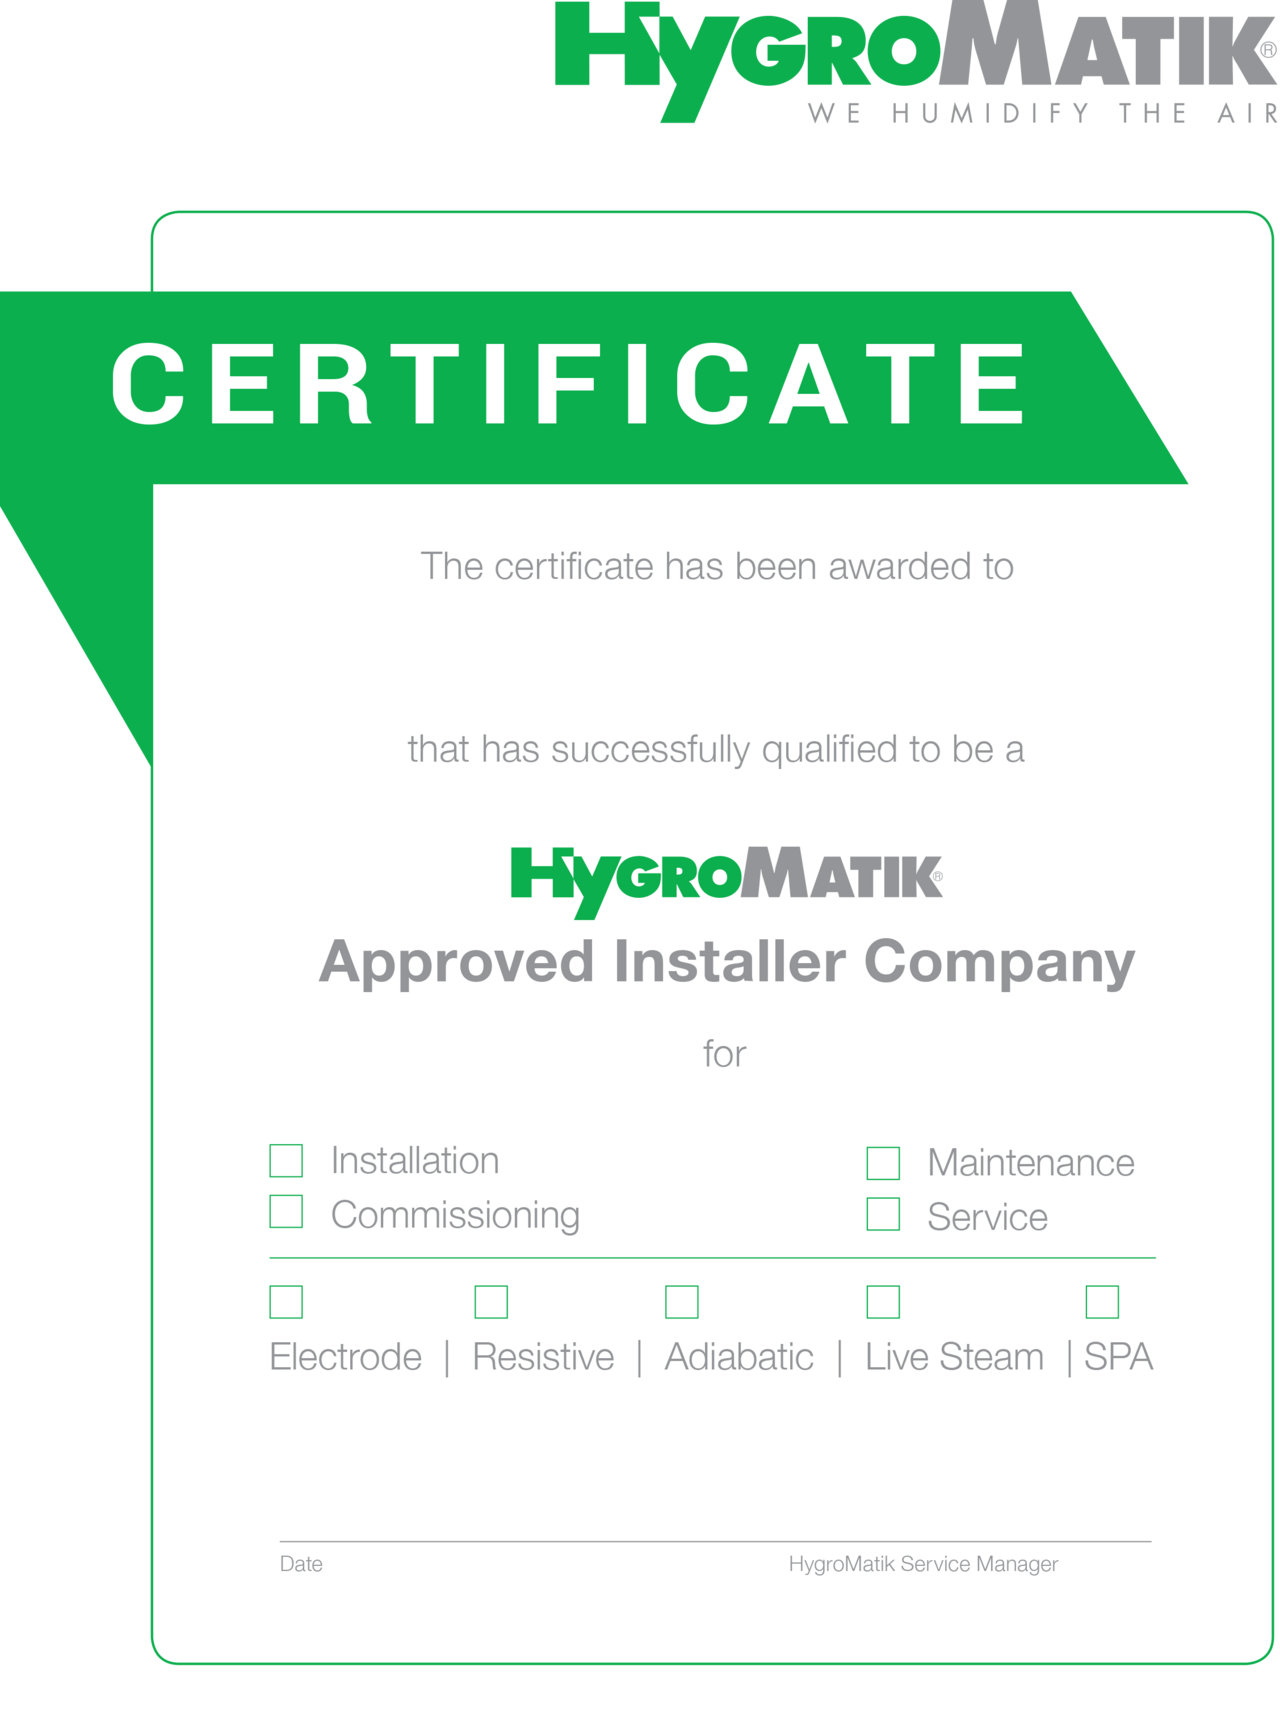 air humidification hygiene quality certificate